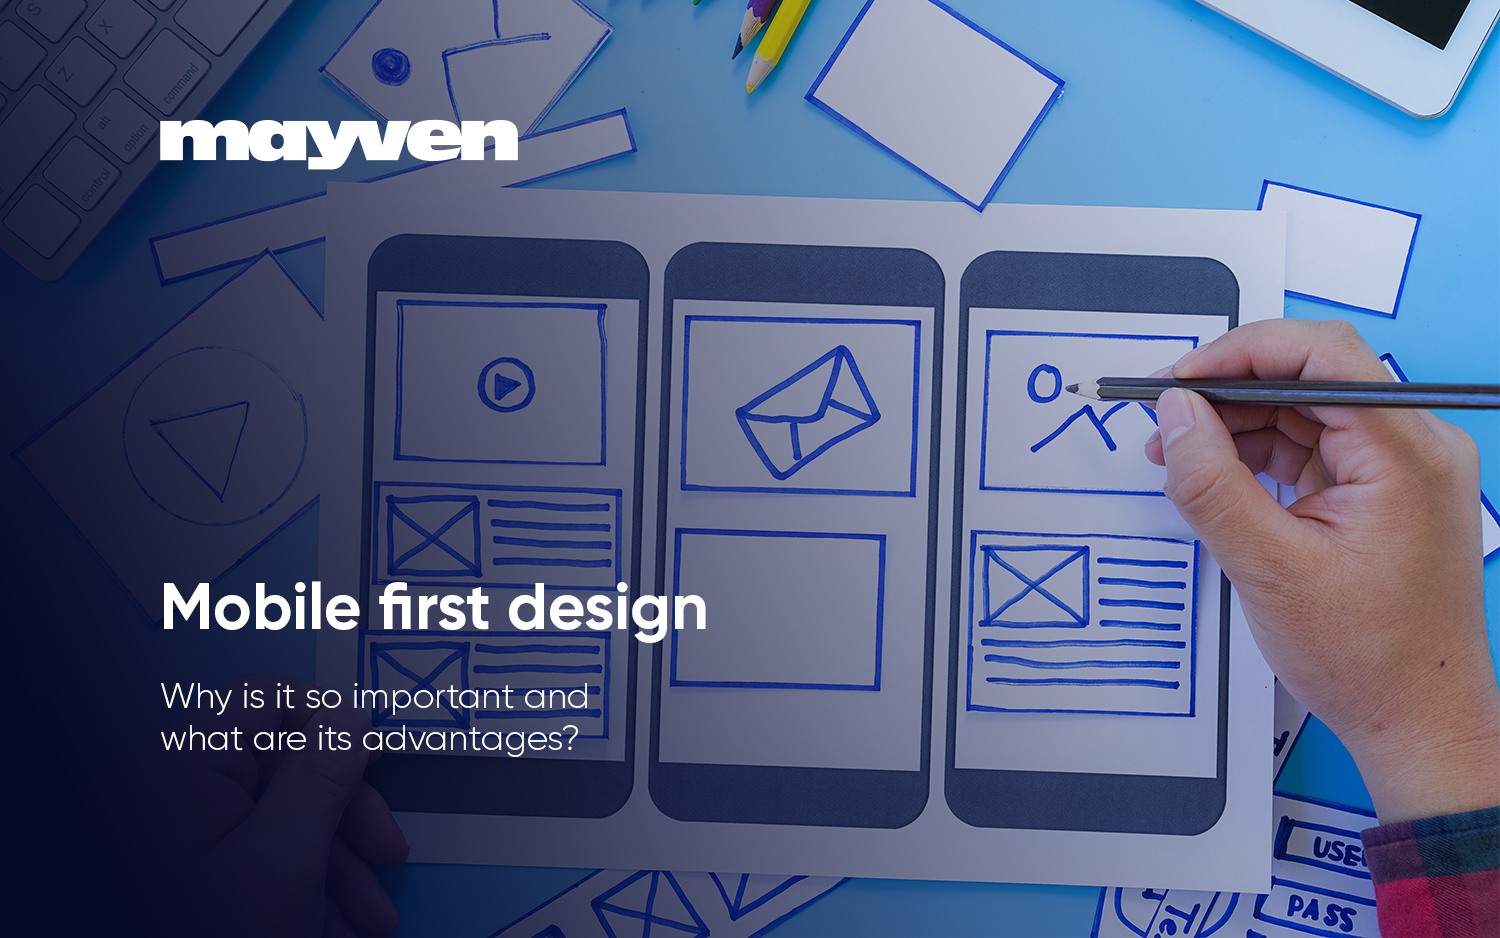 Mobile first design Why is it so important and what are its advantages